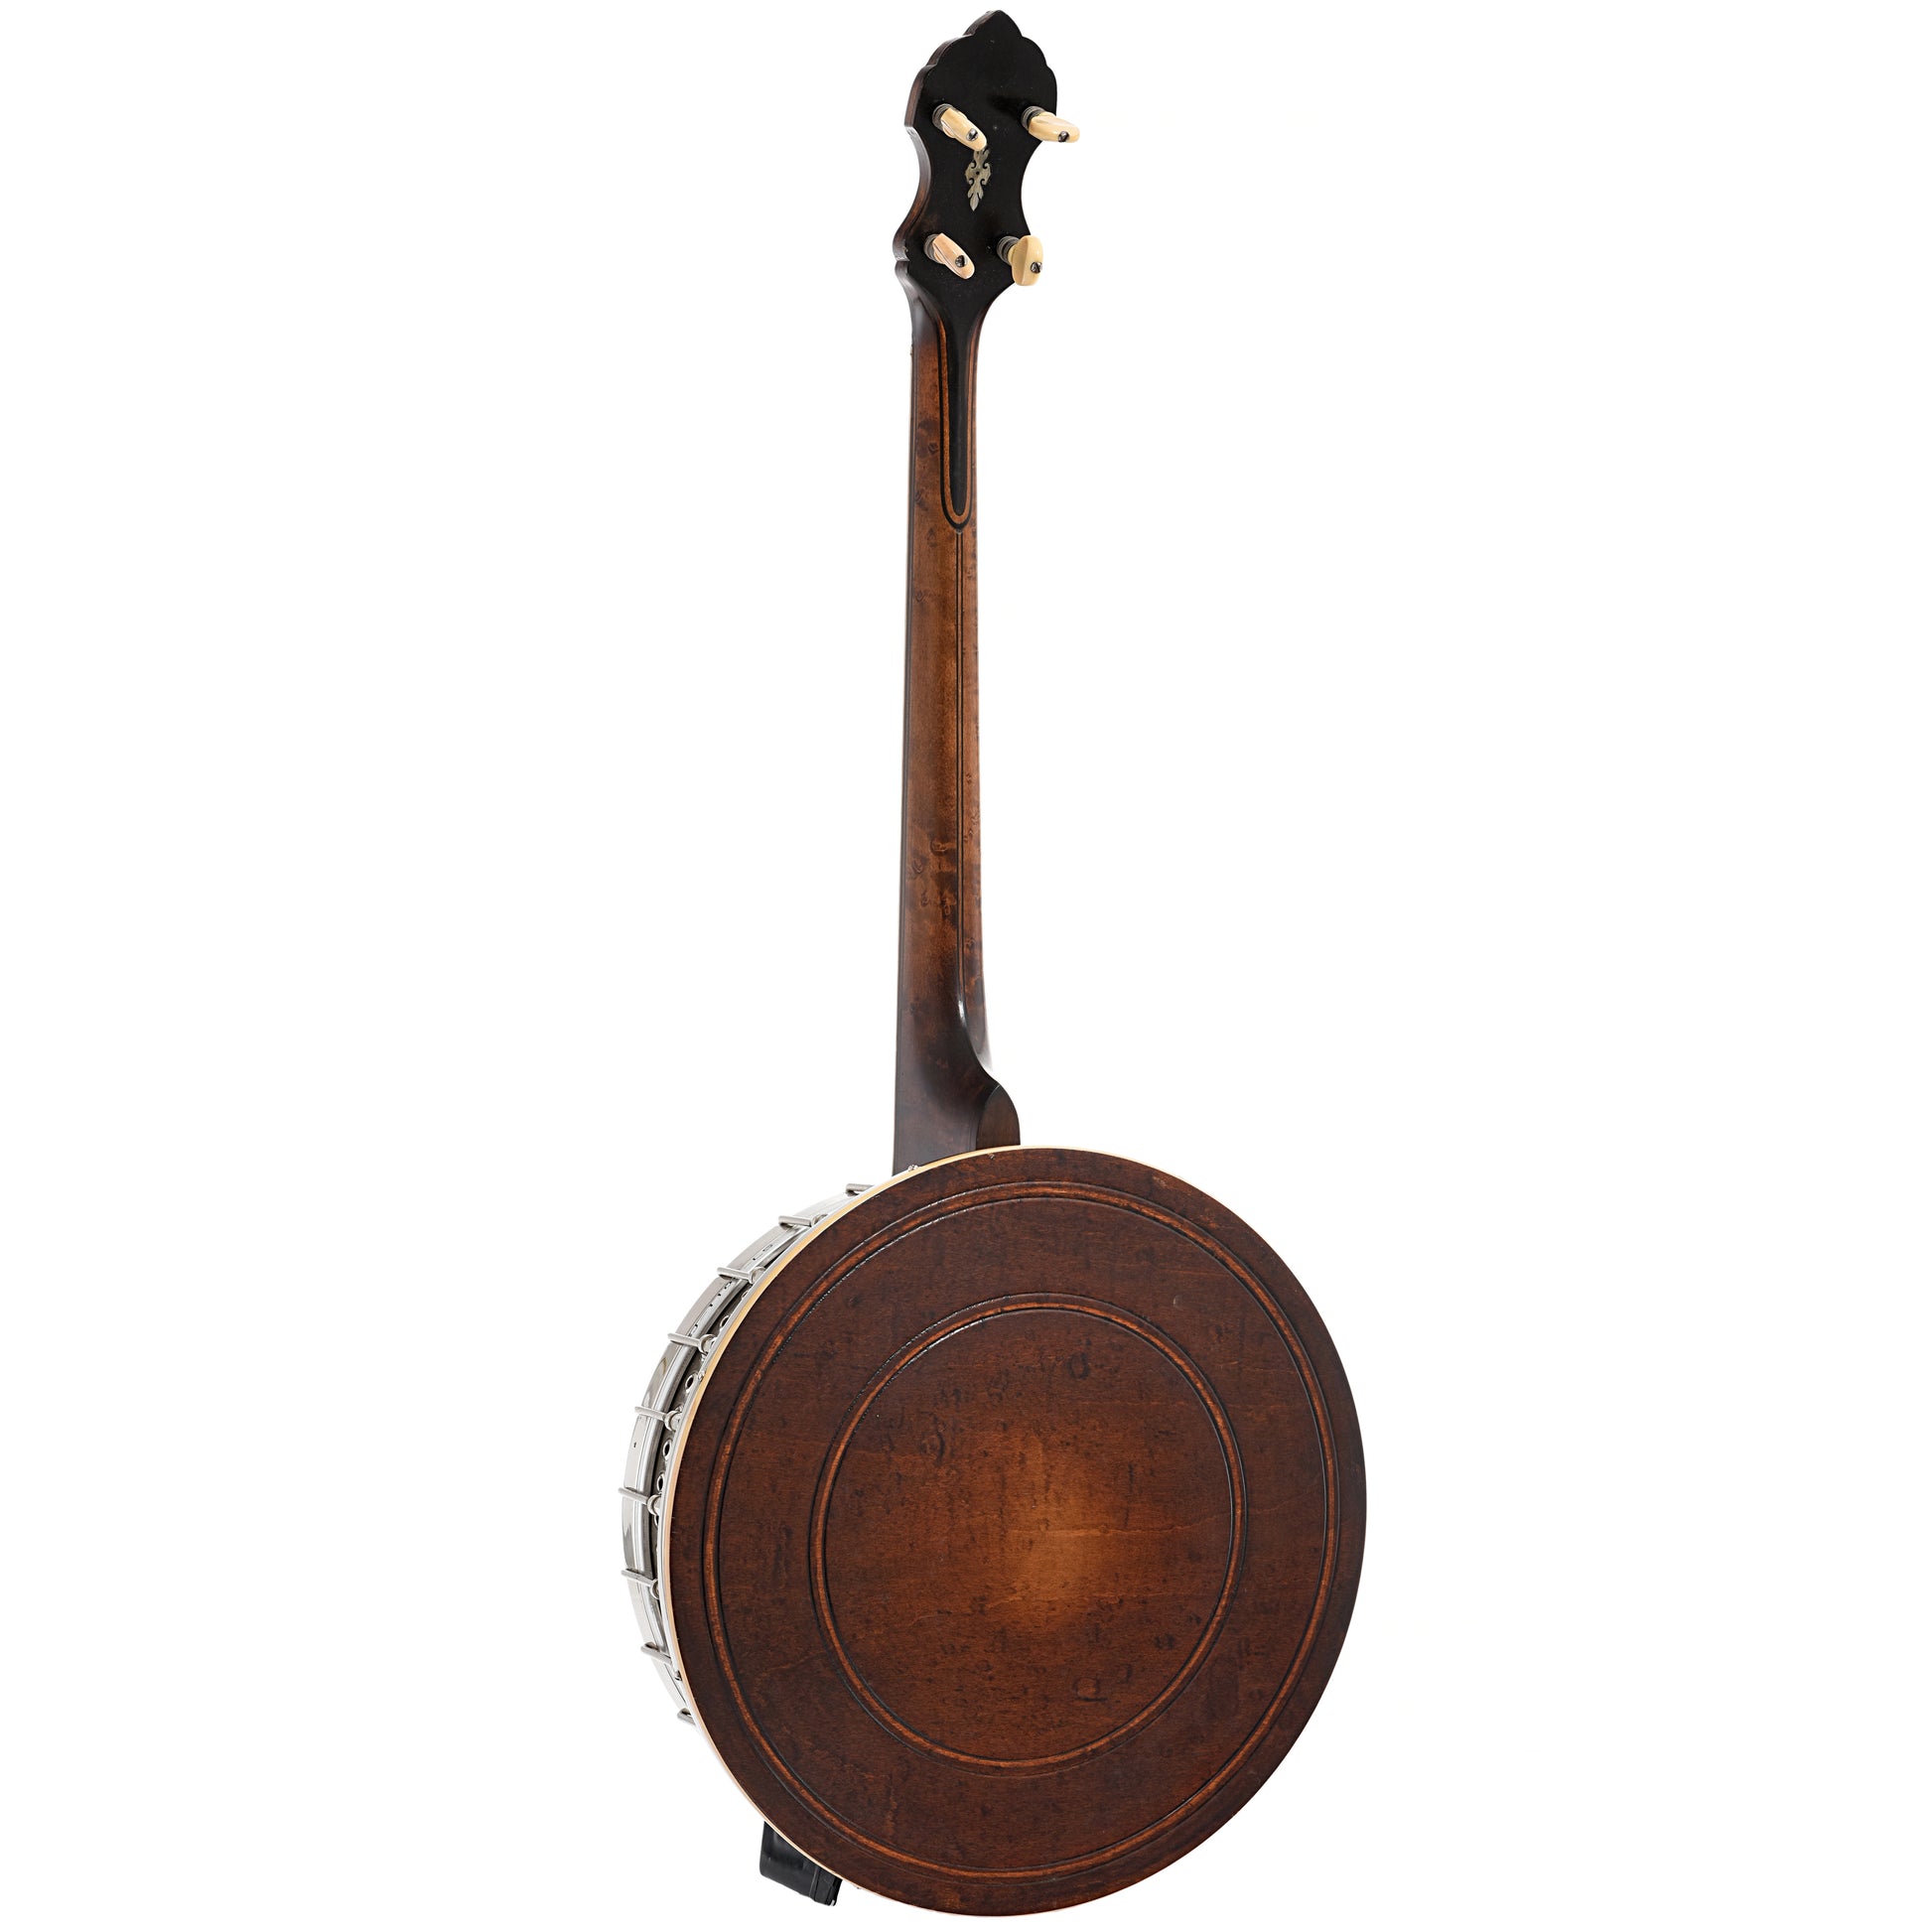 Full back and side of Bacon & Day Silver Bell No.1 Tenor Banjo (c.1923)